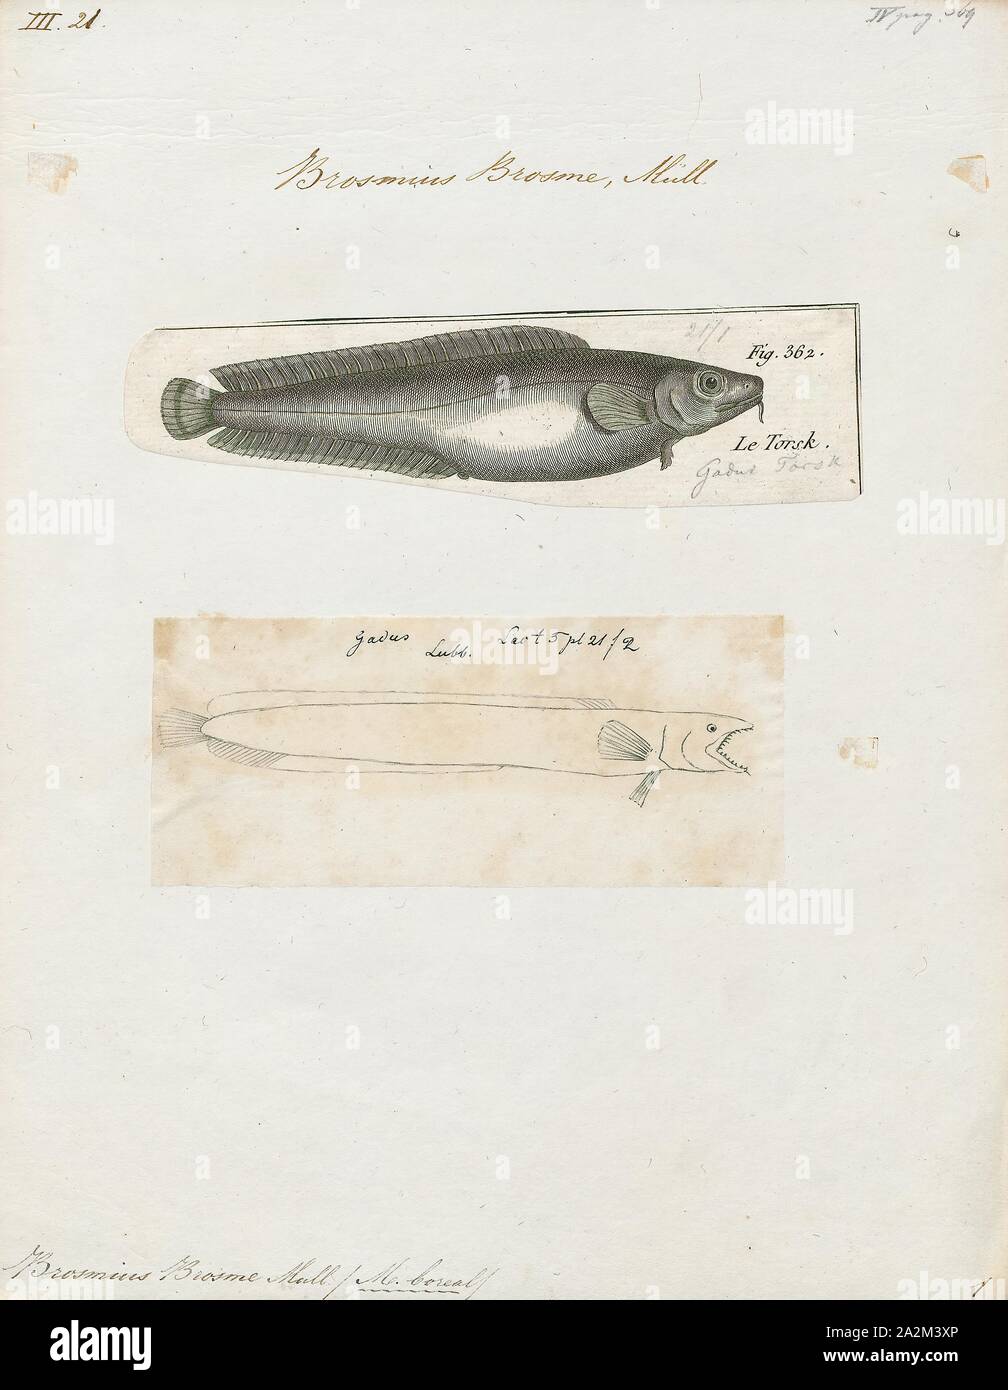 Brosmius brosme, Print, The cusk or tusk (Brosme brosme) is a North Atlantic cod-like fish in the ling family Lotidae. It is the only species in the genus Brosme. Other common names include brismak, brosmius, torsk and moonfish., 1700-1880 Stock Photo